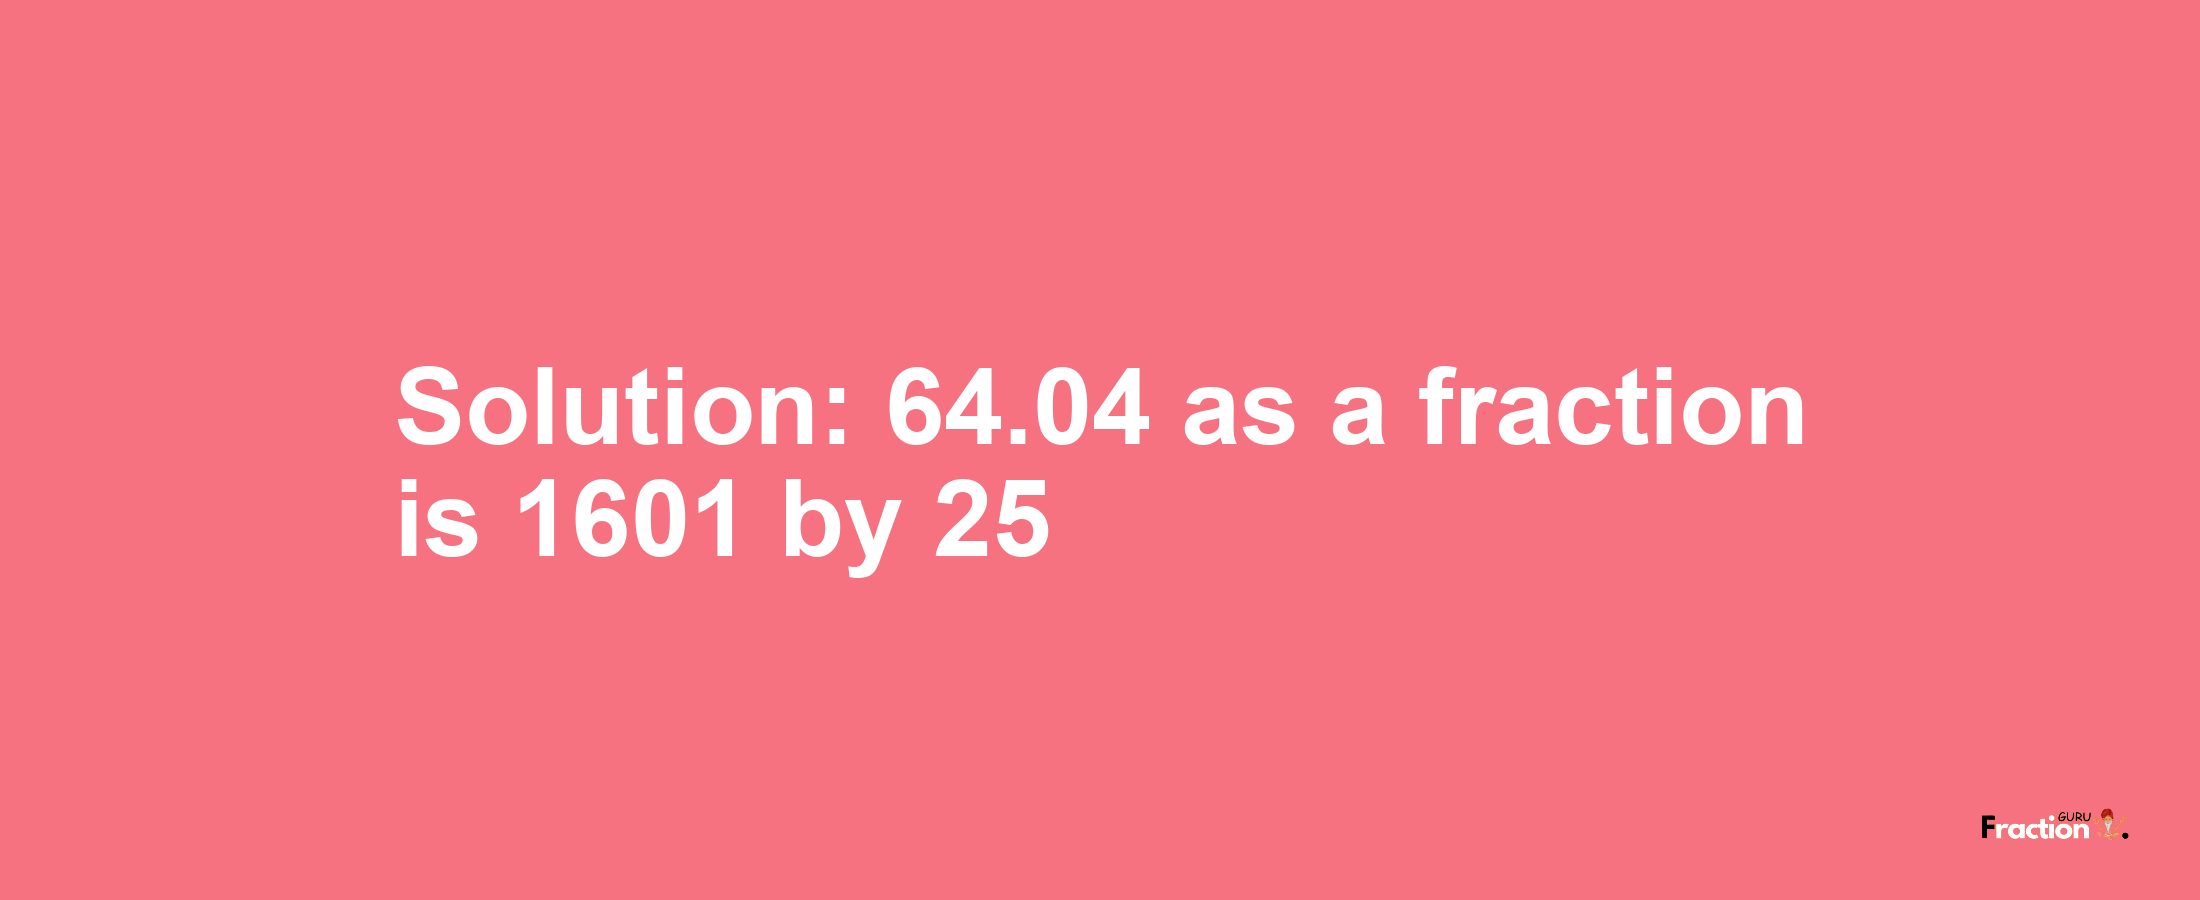 Solution:64.04 as a fraction is 1601/25